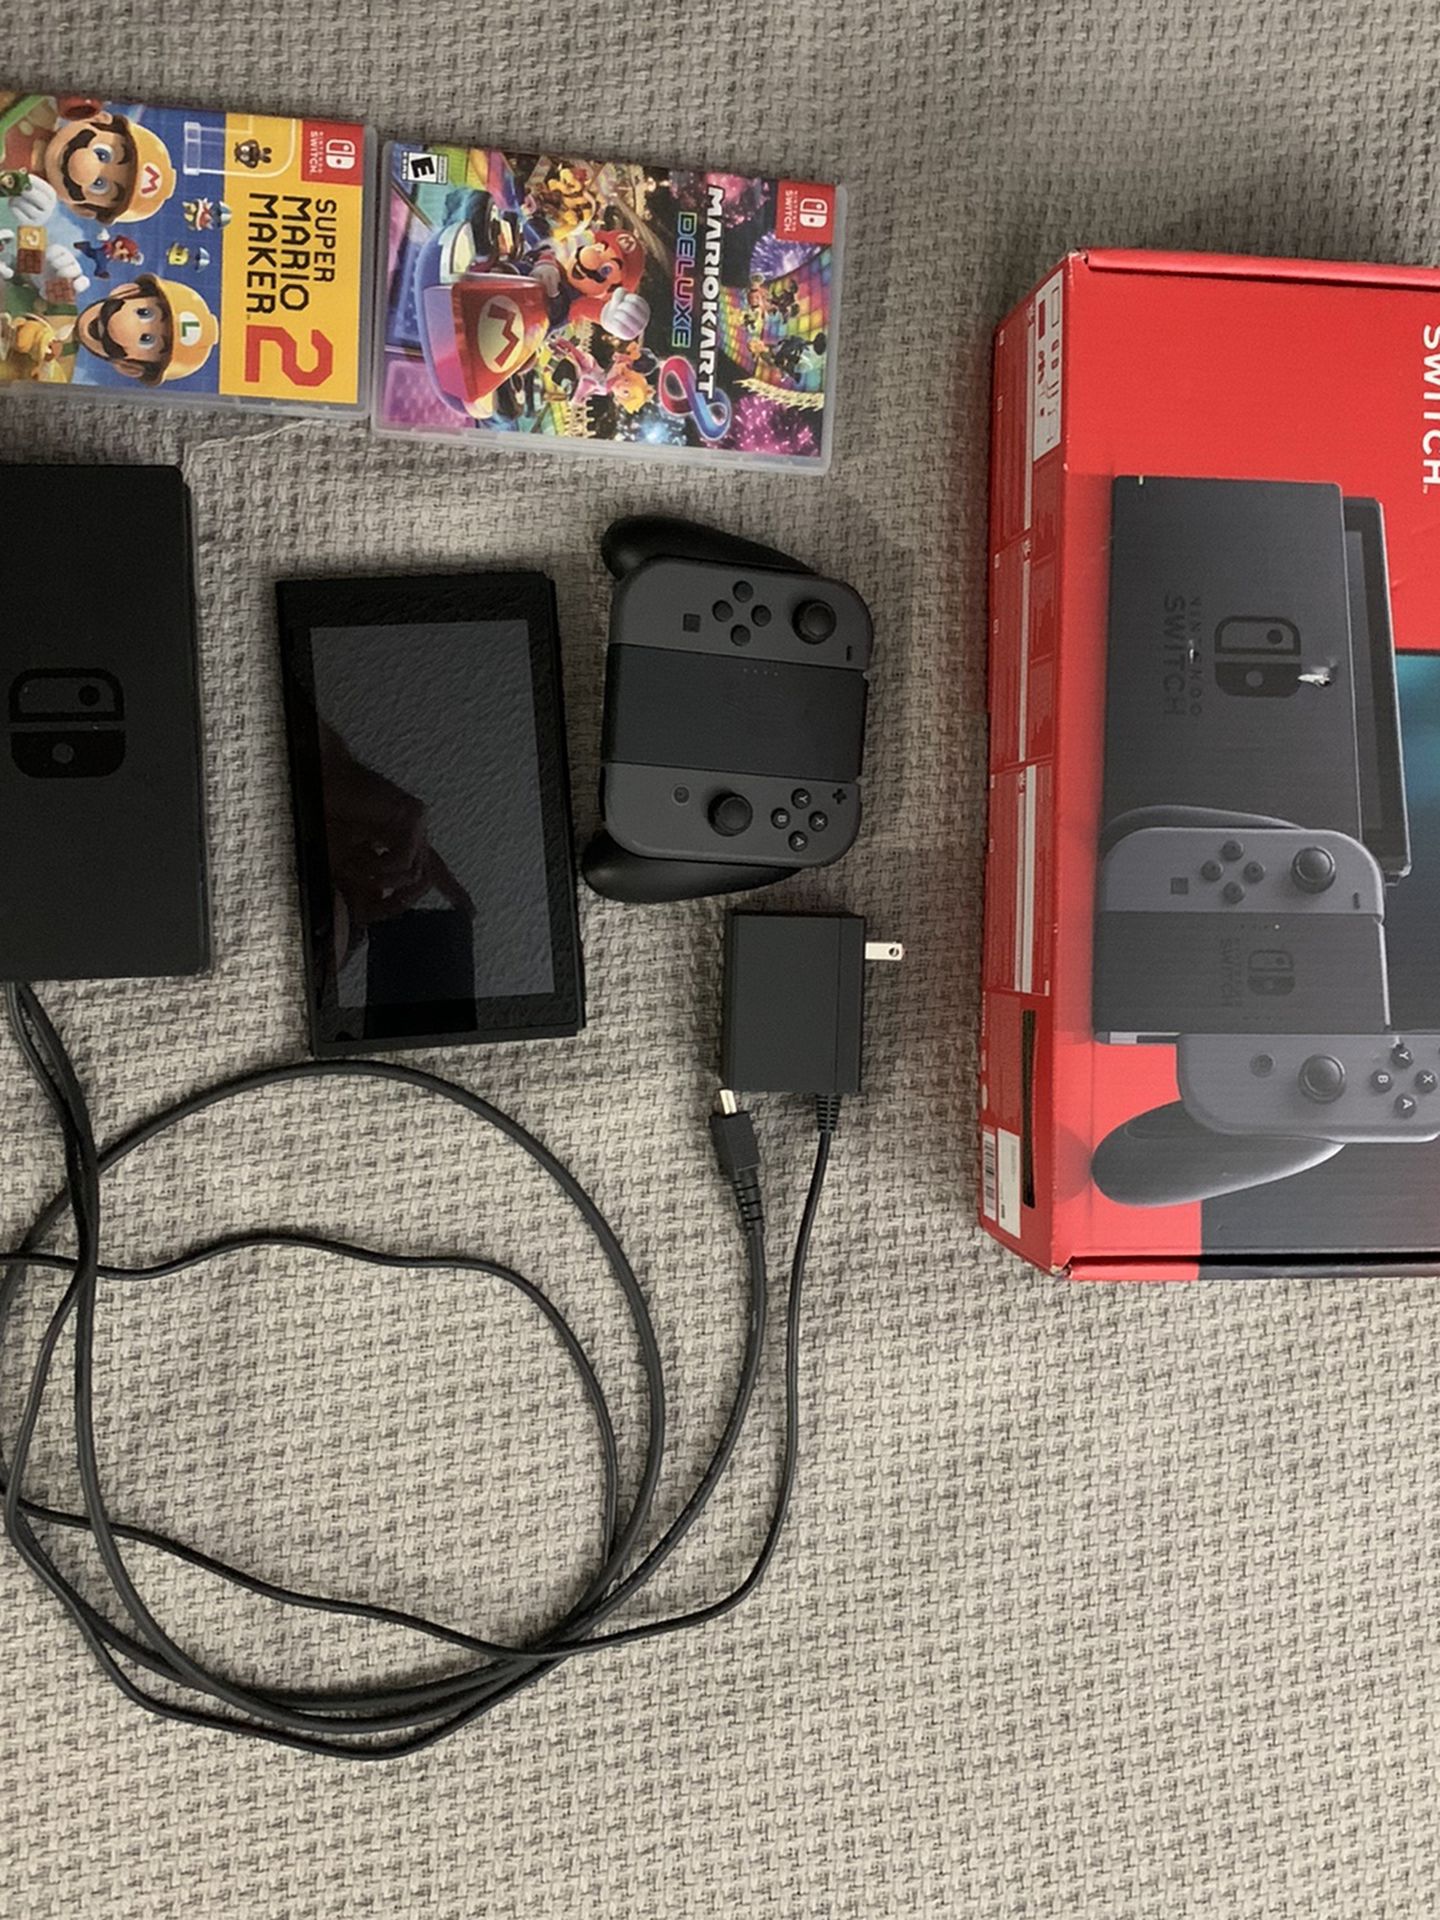 Nintendo Switch Used With 2 Games